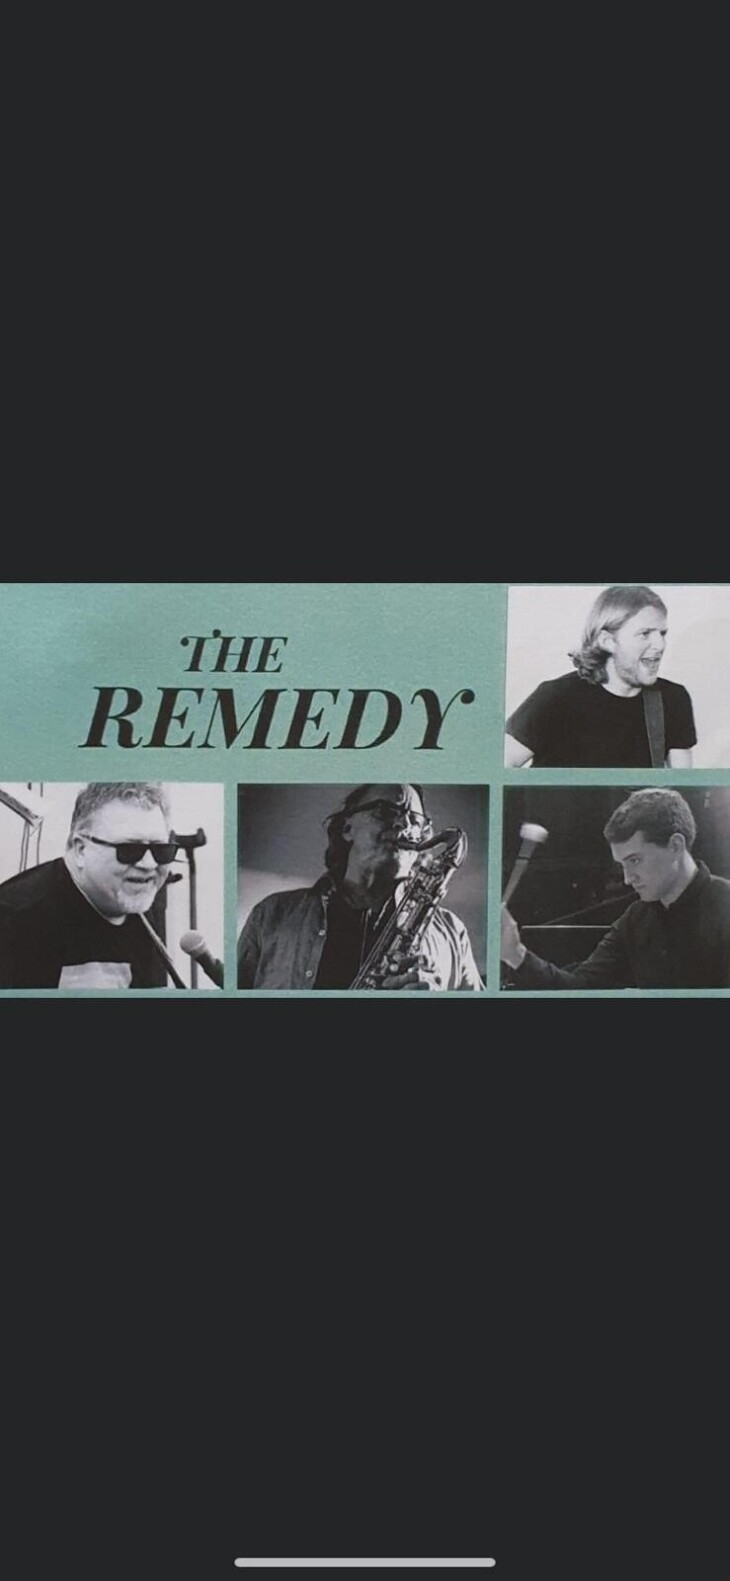 THE REMEDY - NEW TO THE CC